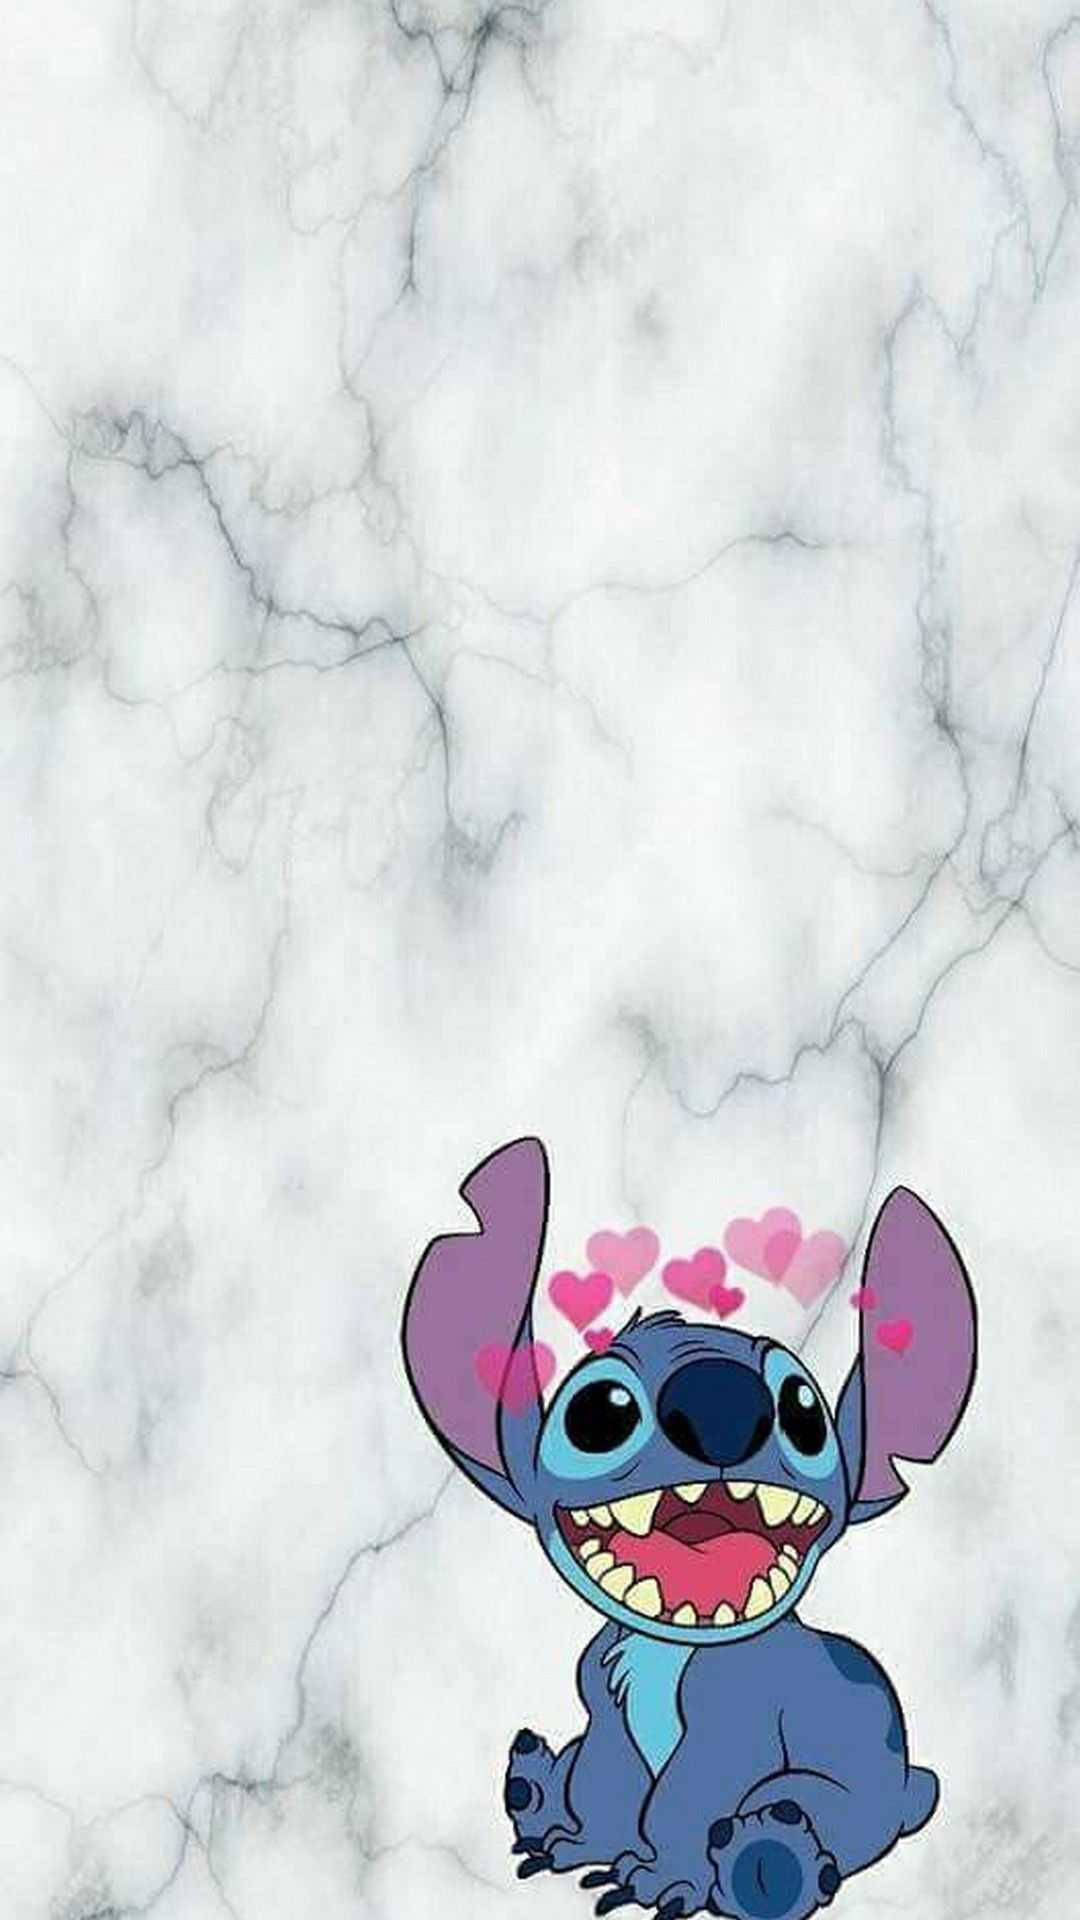 Cute Stitch With Pink Hearts Wallpaper